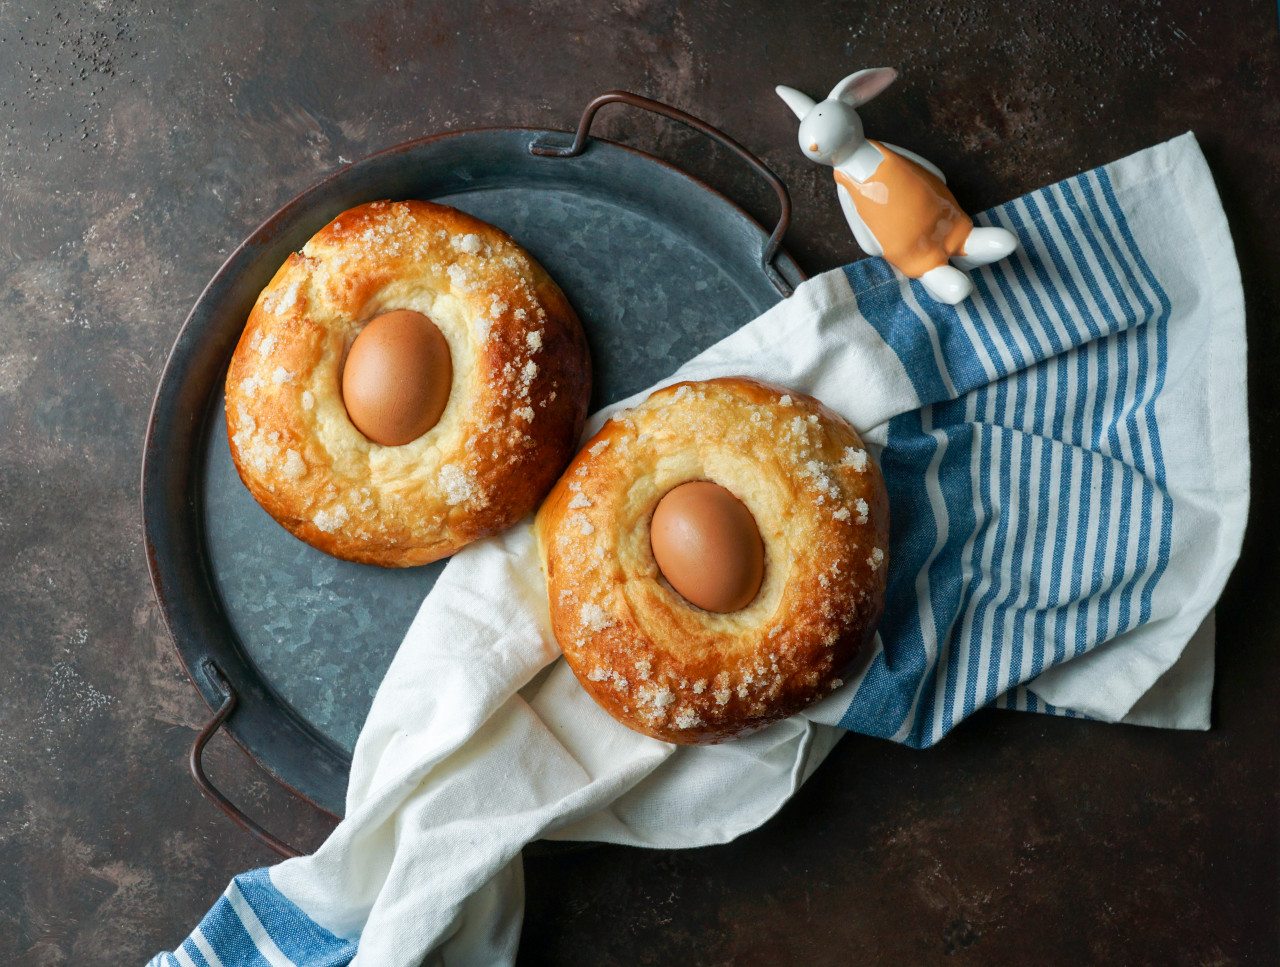 mona de pasqua typical spanish pastry with egg easter